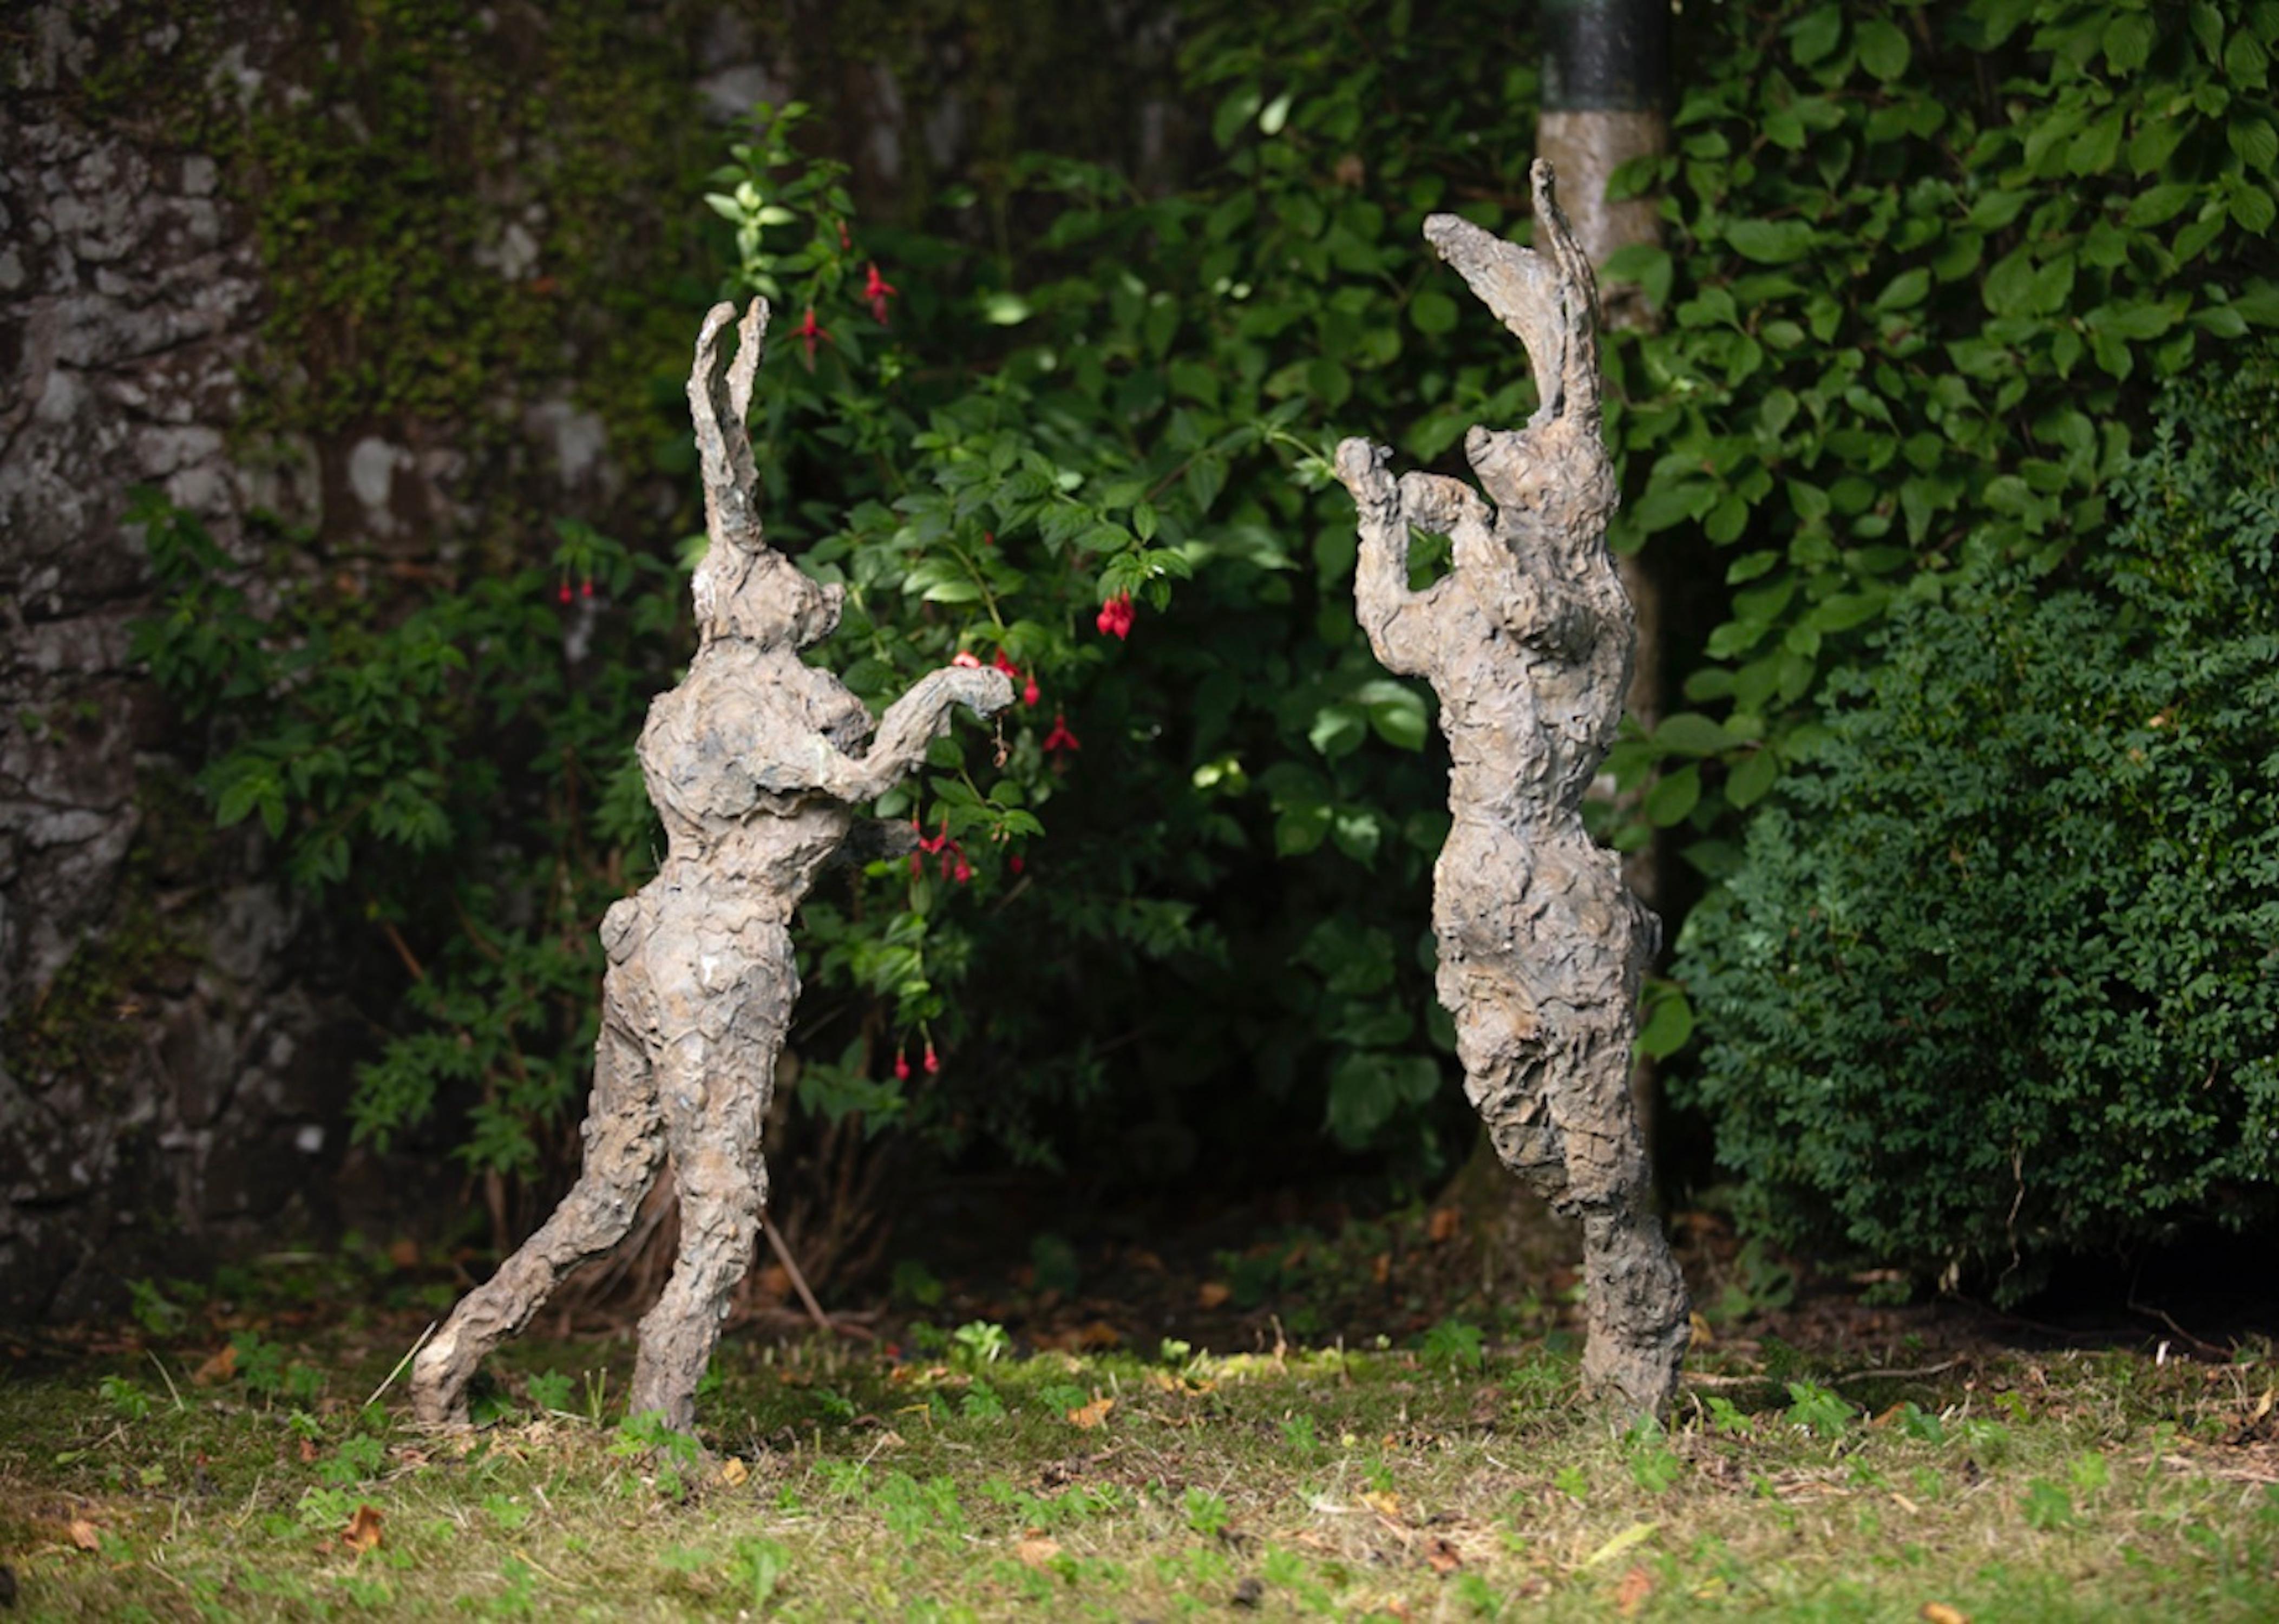 Stephen Charlton (B. 1958): Pair of large, boxing hares, 2015. Bronze no 3/9
‘There’s no better feeling than when we experience a lift of our spirit. When captured, that exquisite moment can transcend our external environment. To make people smile